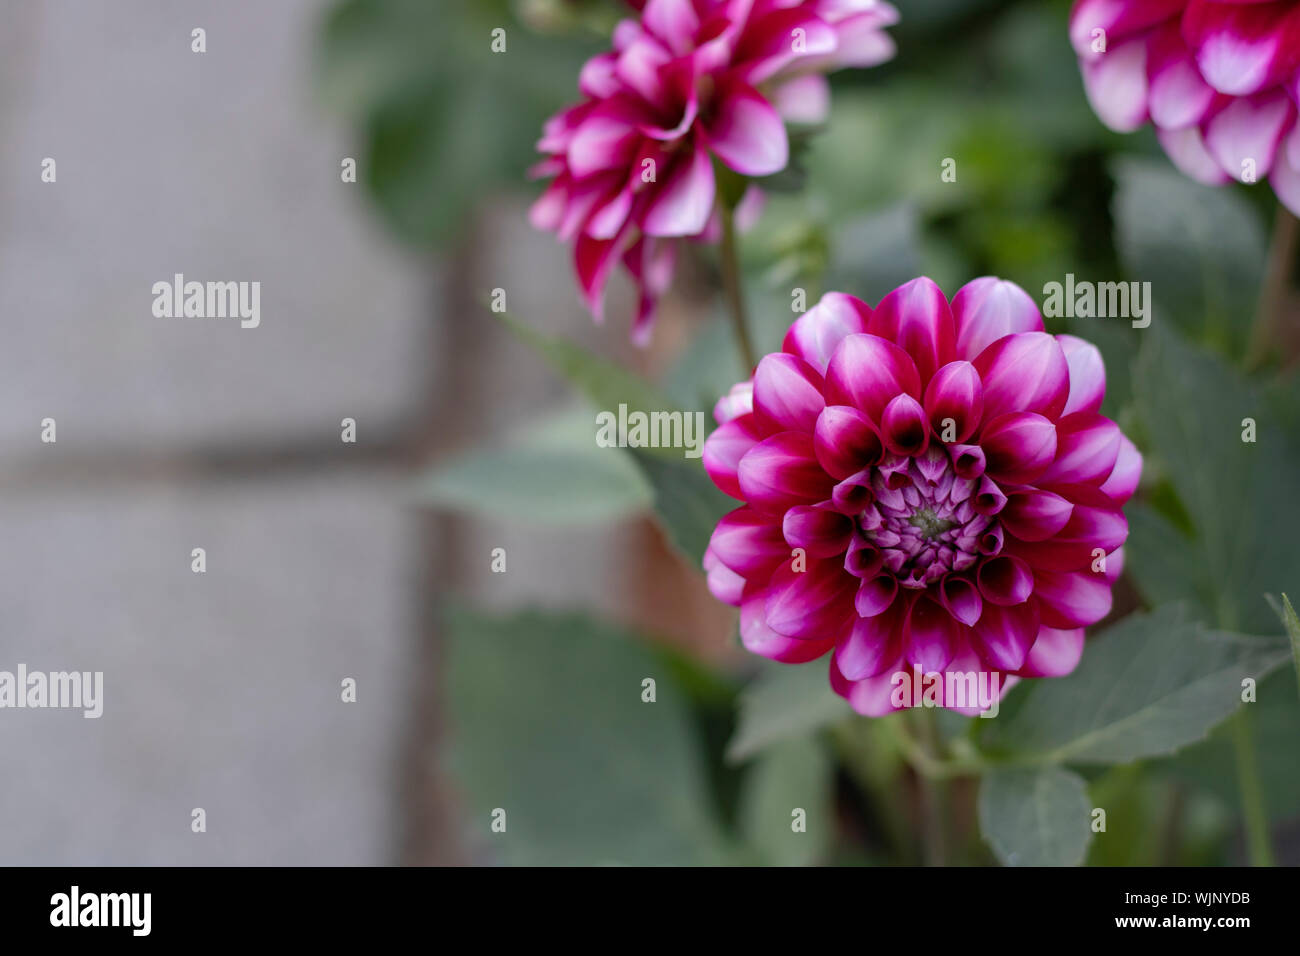 Close-up of Dahlia pinnata flower. Purple and andean tones. Blurred Background Stock Photo